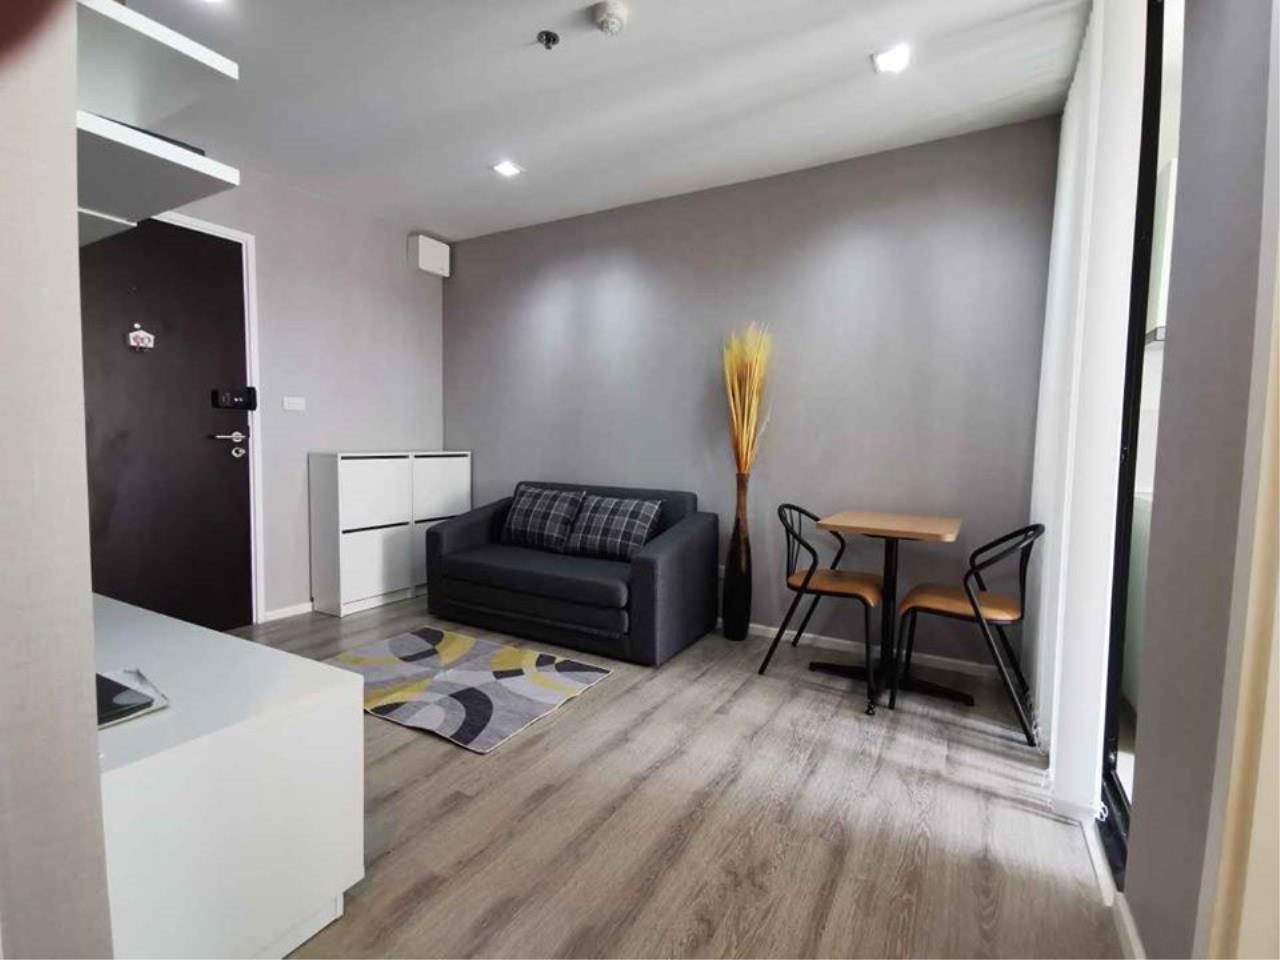 Agent Thawanrat Agency's Condo for rental Knightsbridge Bearing Near BTS.Bearing Agricultural station 1 bedroom,1 bathroom. size 35.05 sqm. Floor 7th. fully furnished Ready to move in 1